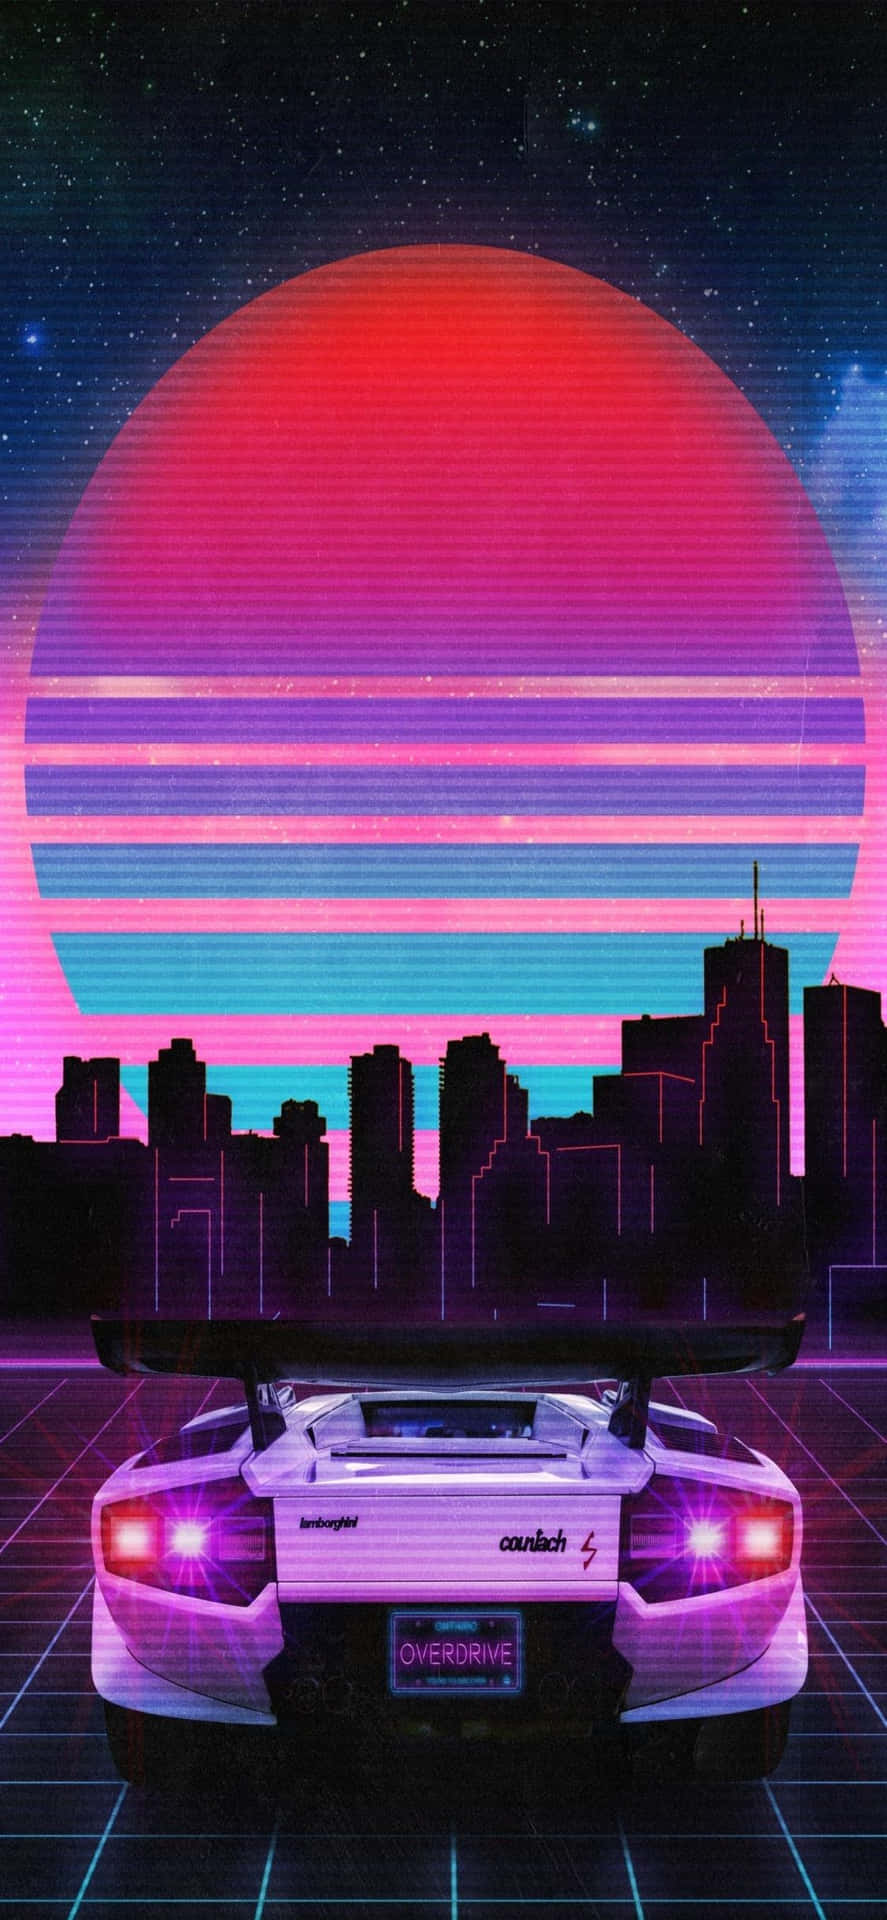 A throwback to 90s tech with this Retro Iphone. Wallpaper